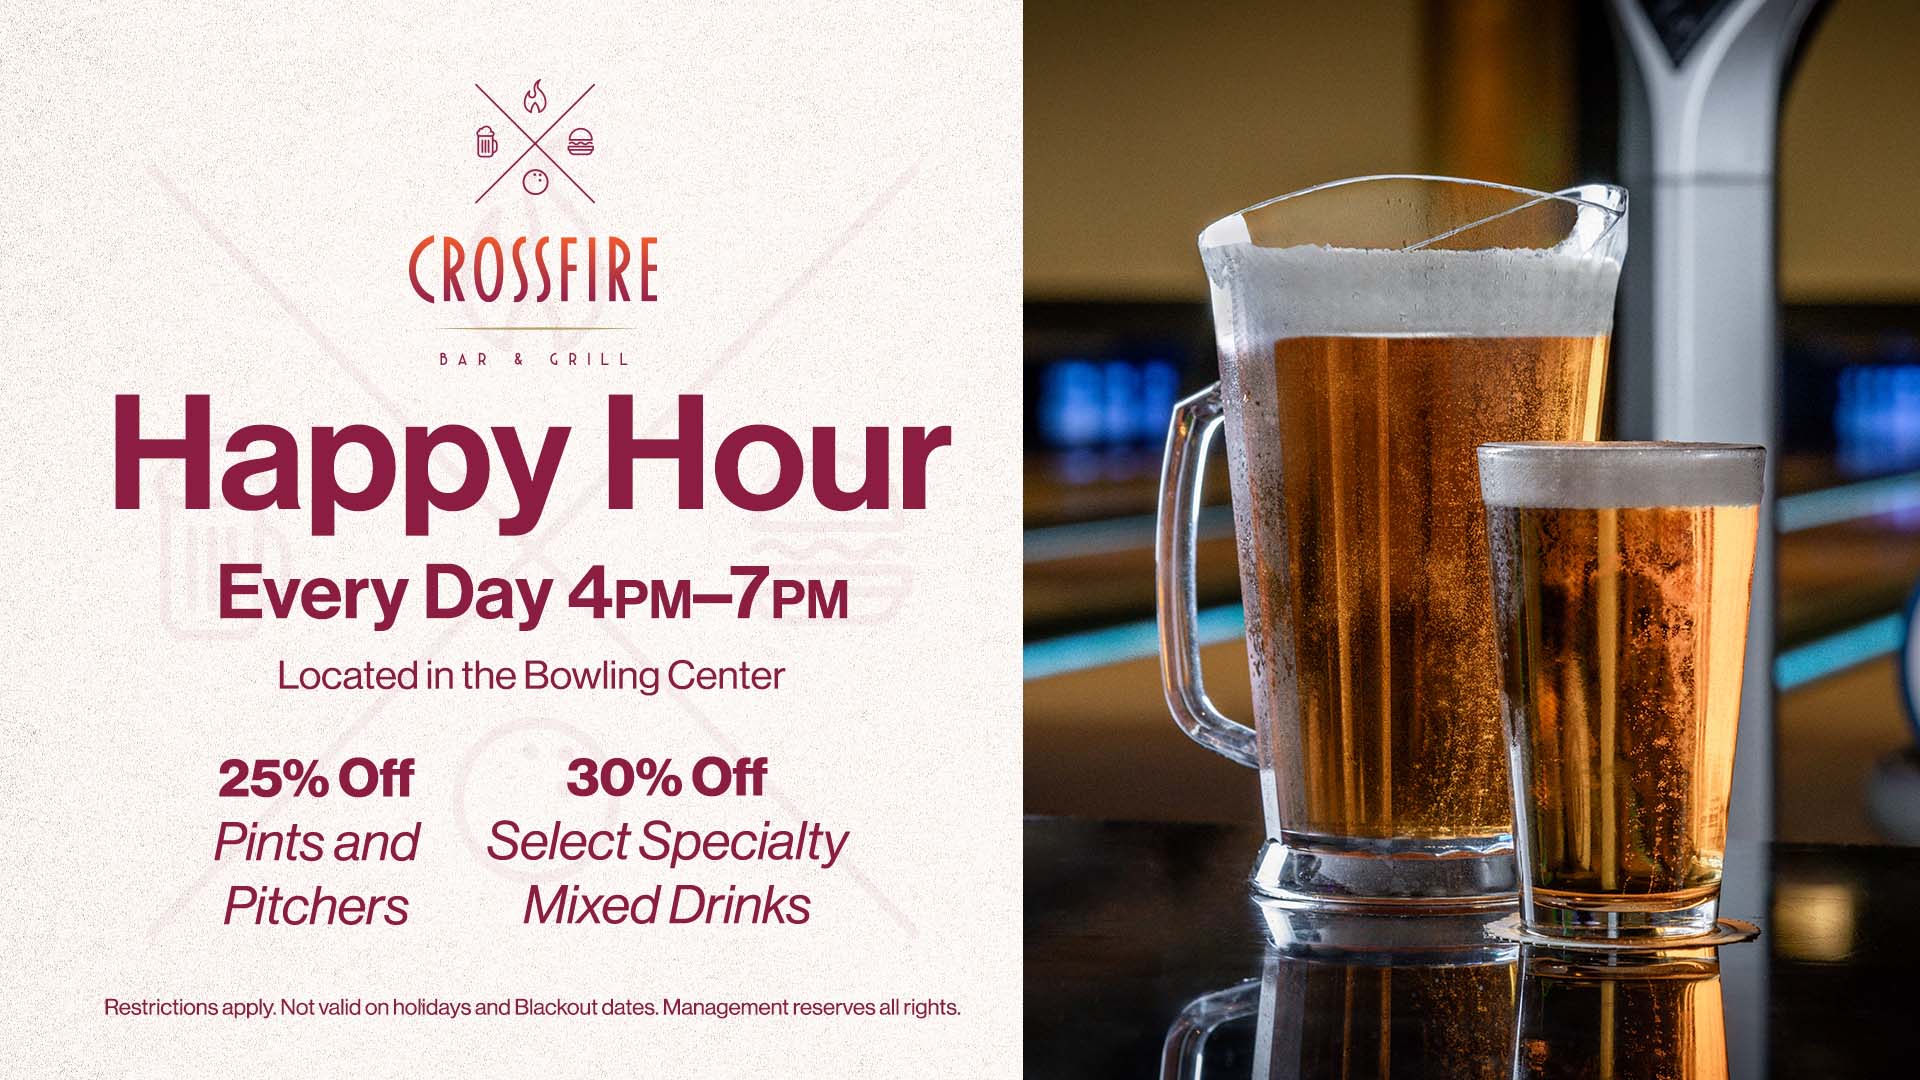 Crossfire Bar & Grill Happy Hour daily from 4pm-7pm